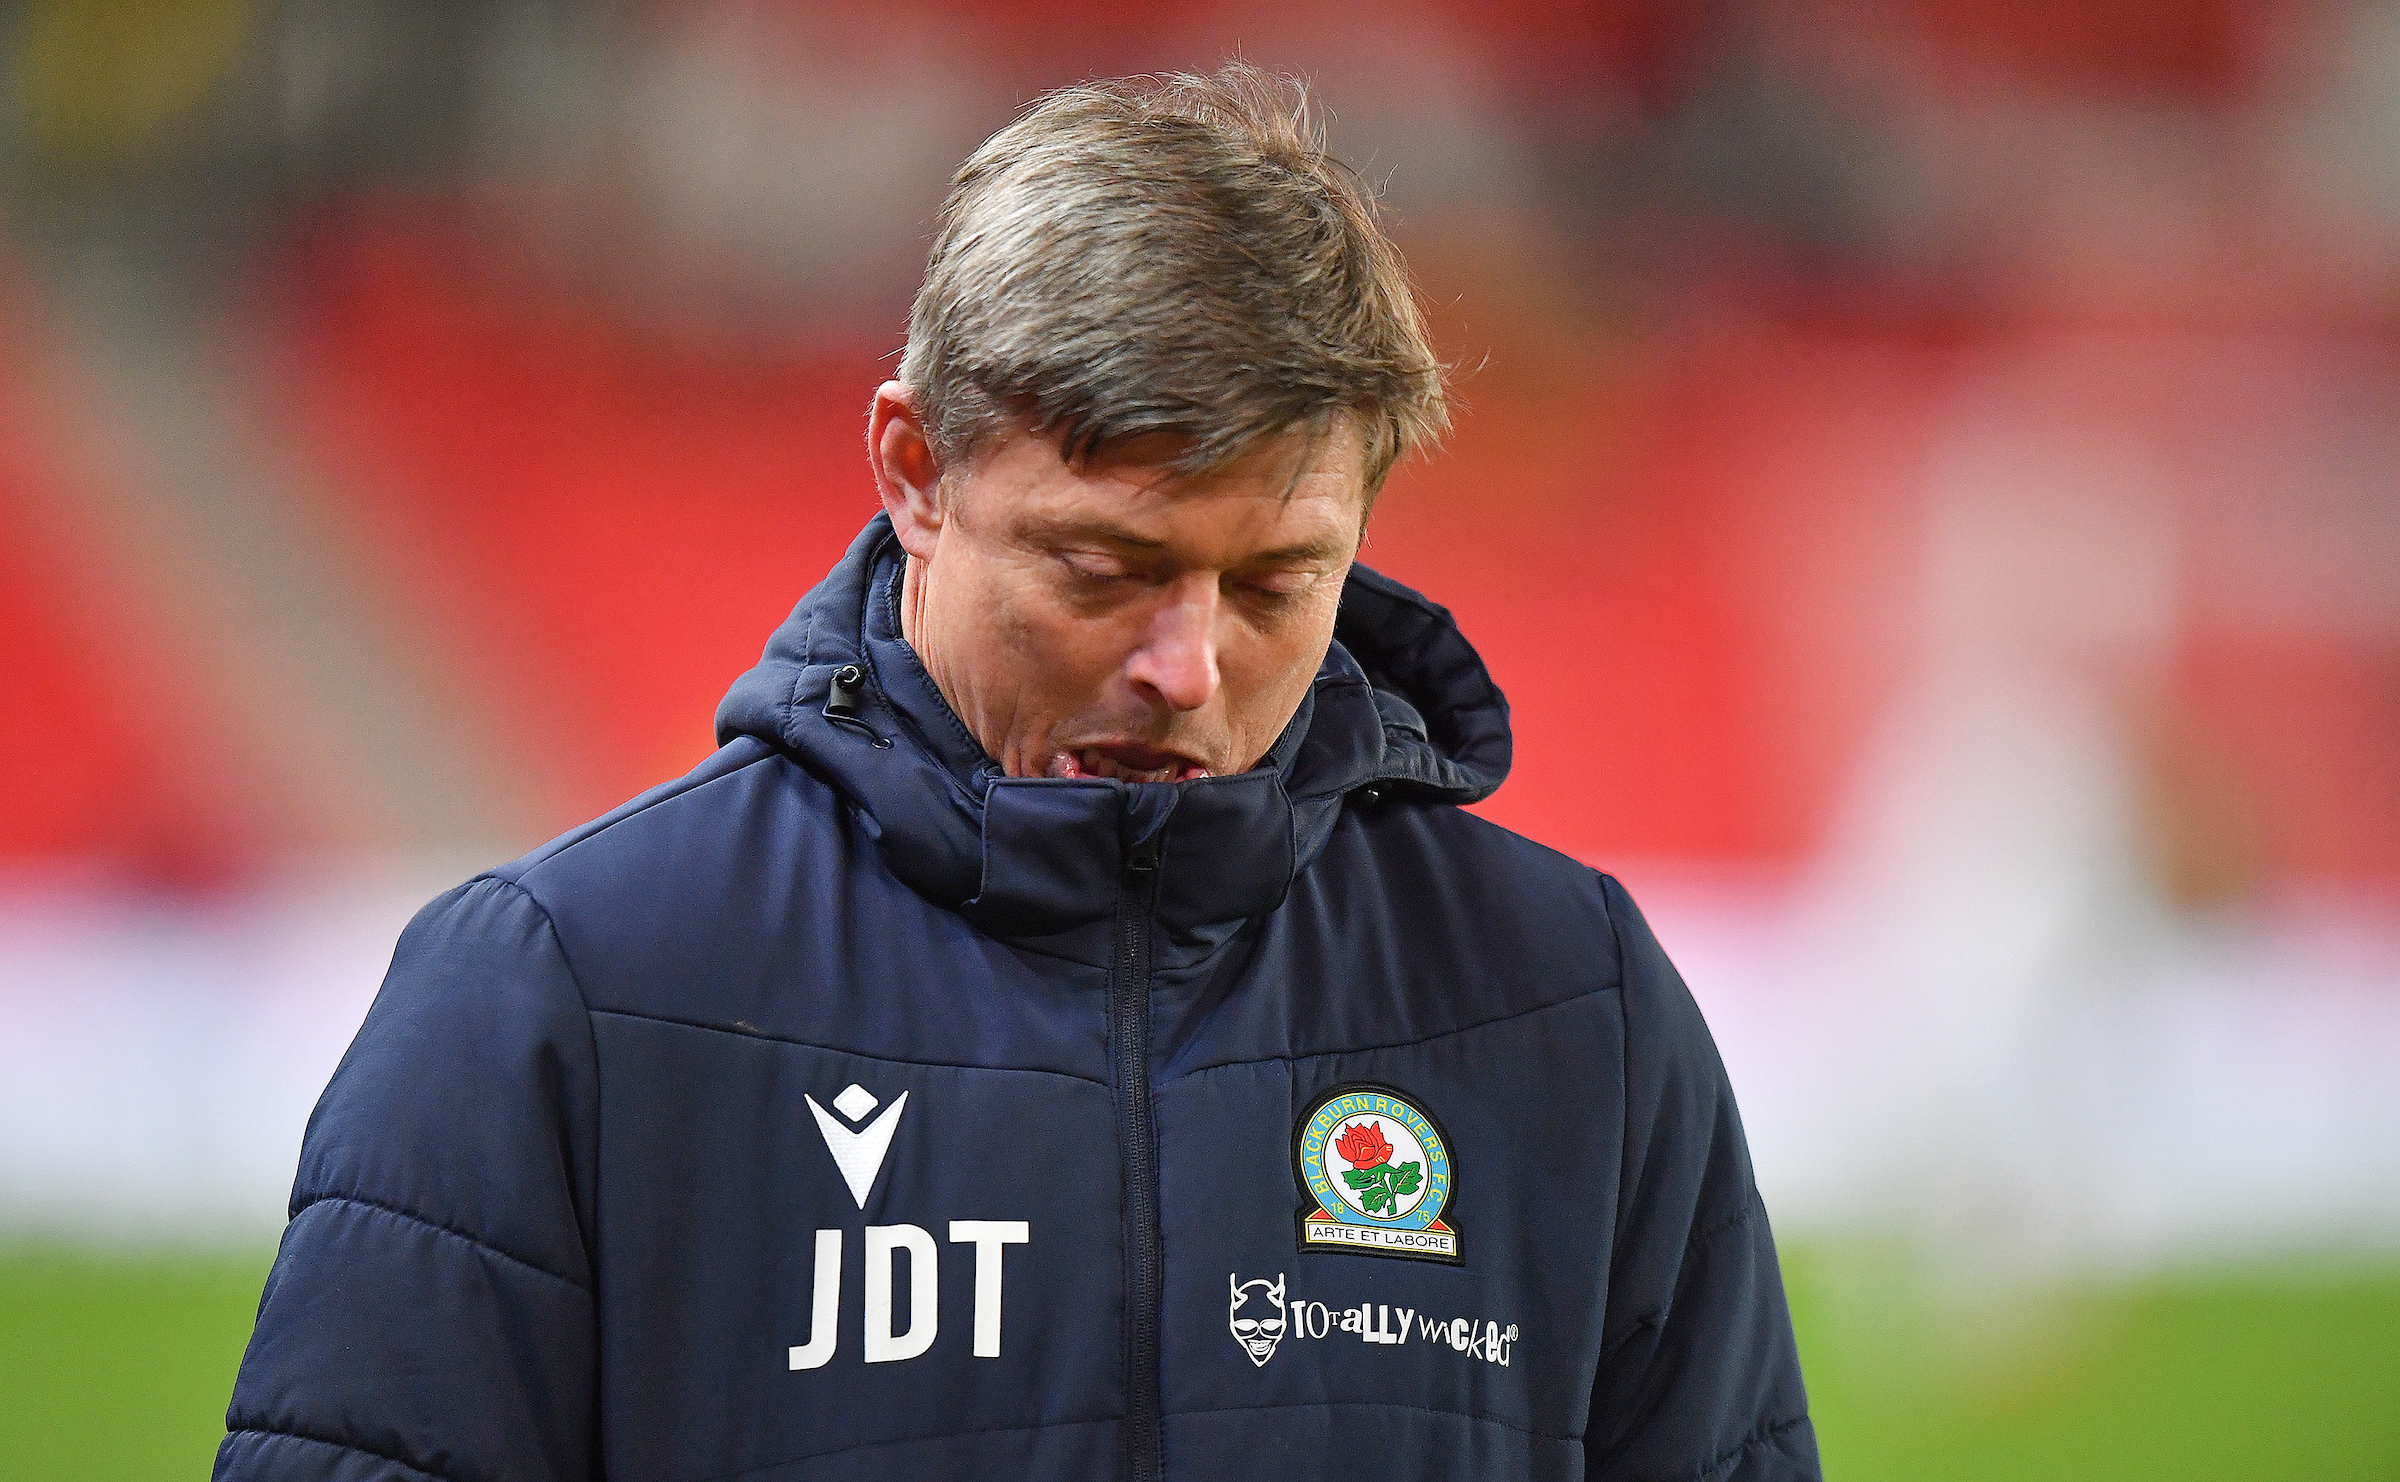 Tomasson brought an identity to Blackburn but exit was inevitable